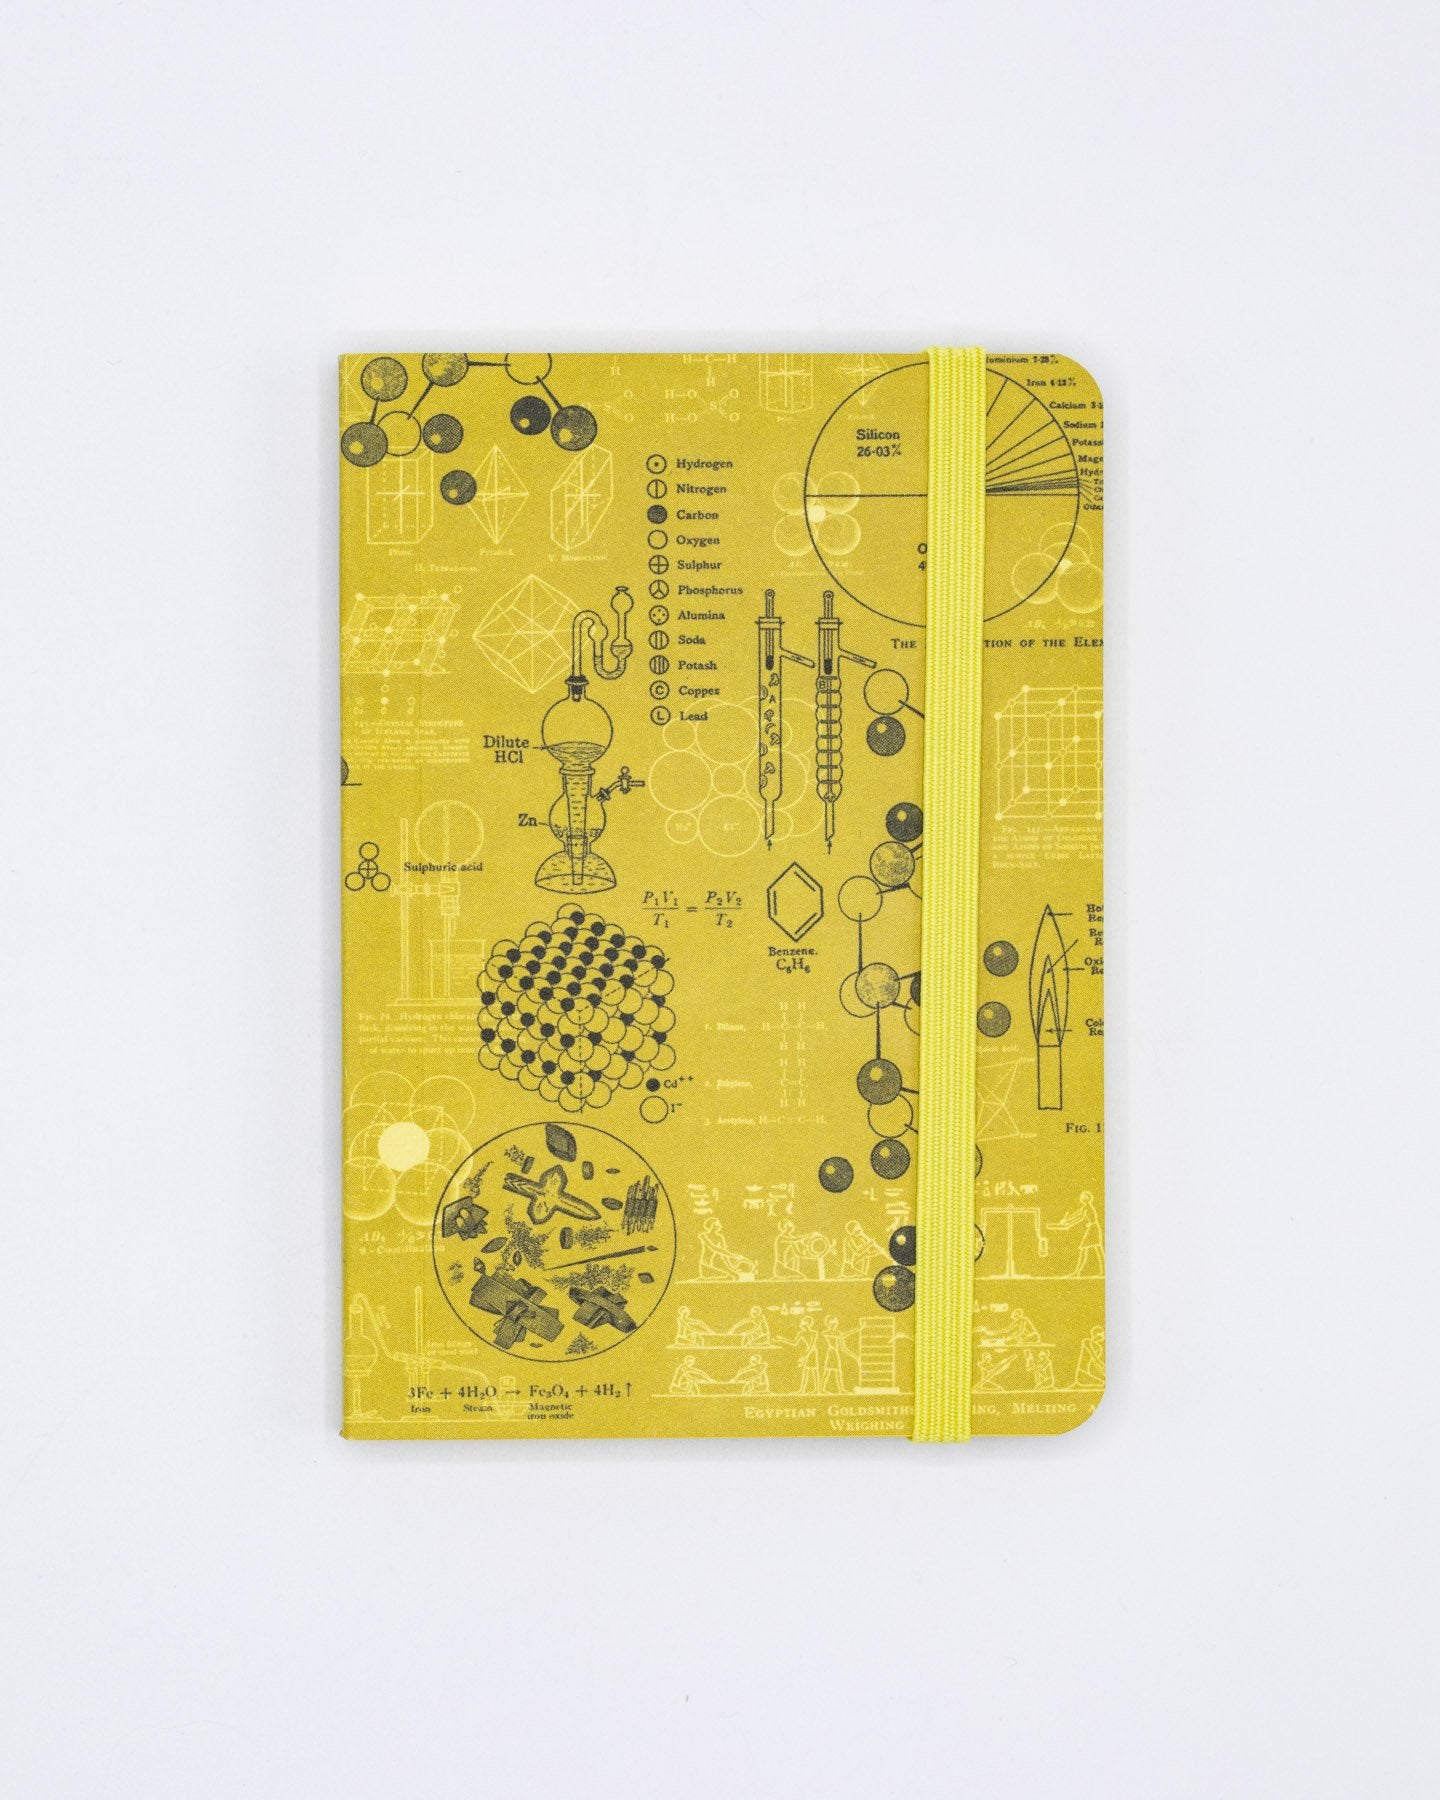 Chemistry Experiments Observation Mini Softcover Notebook